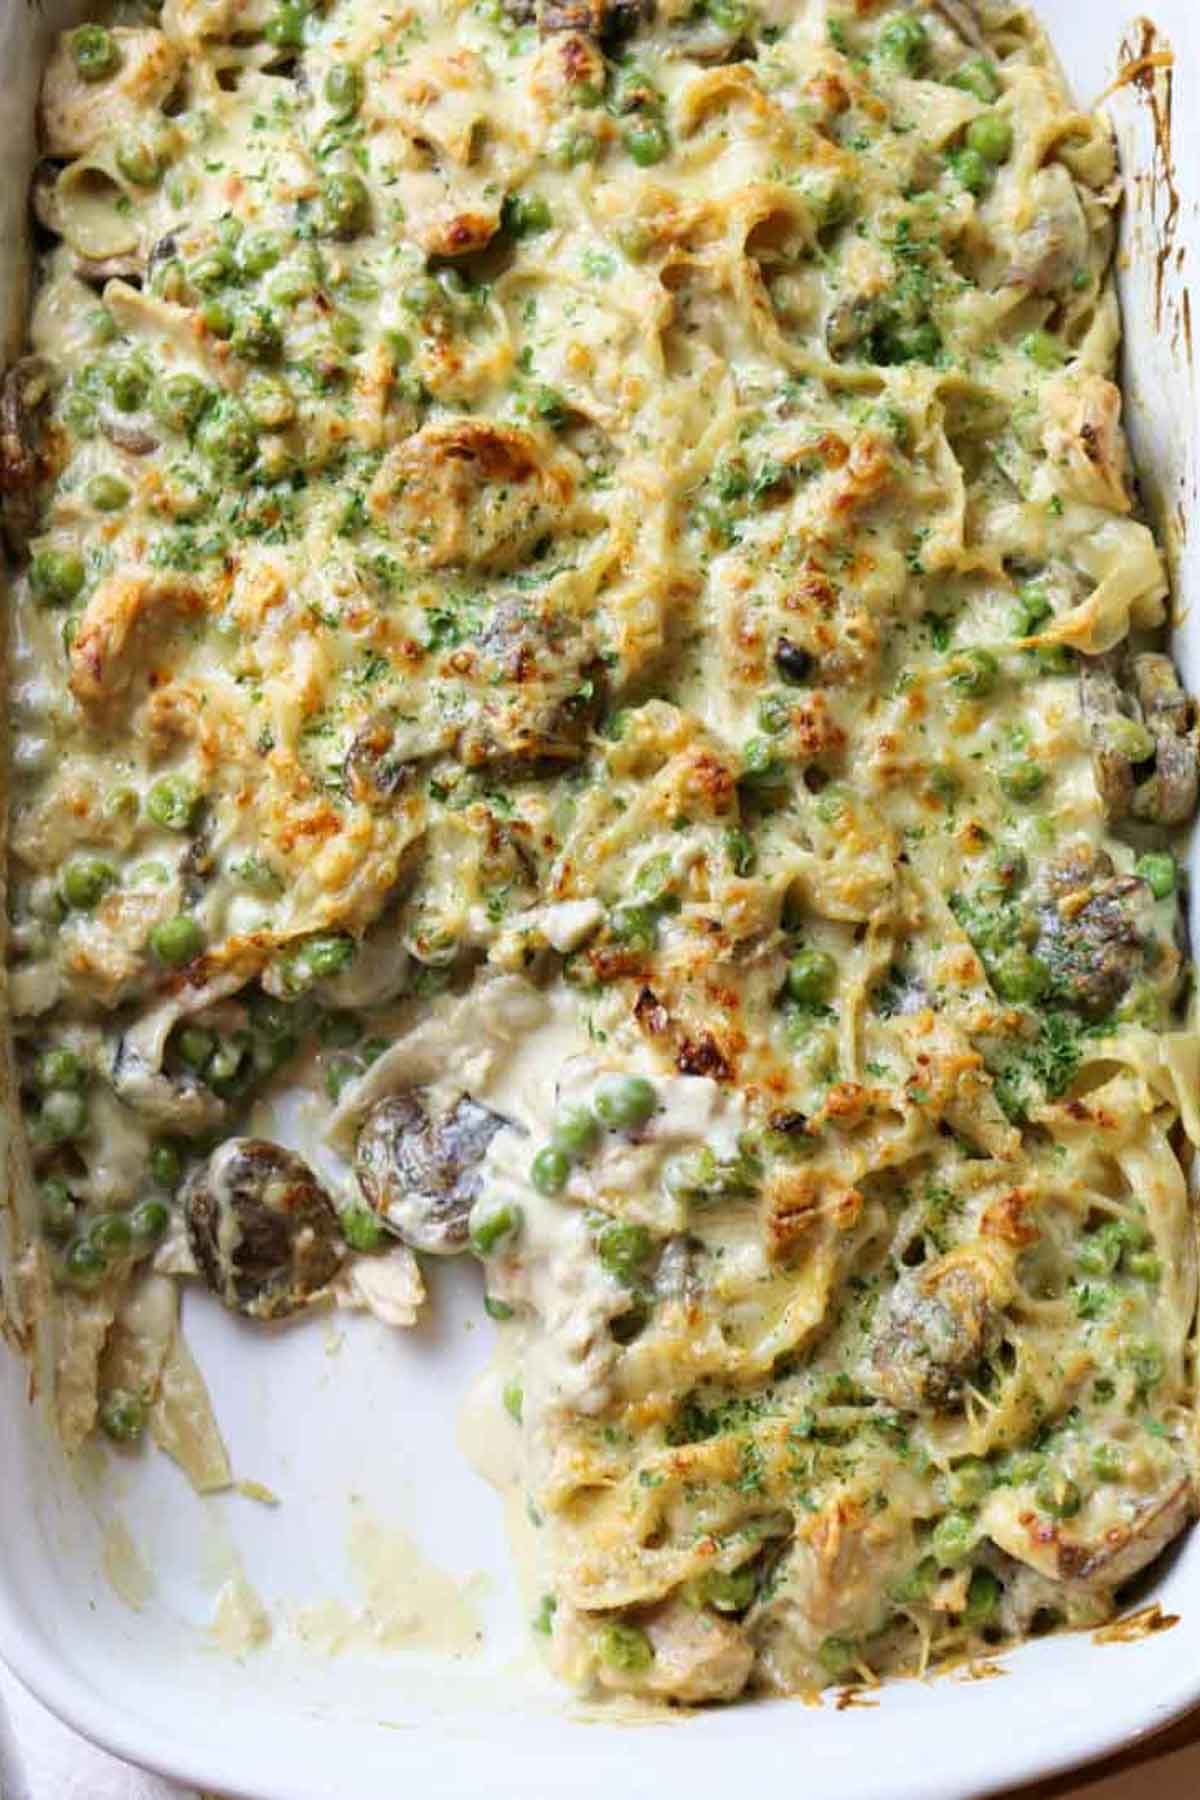 tuna noodle casserole with mushrooms and peas in white dish.